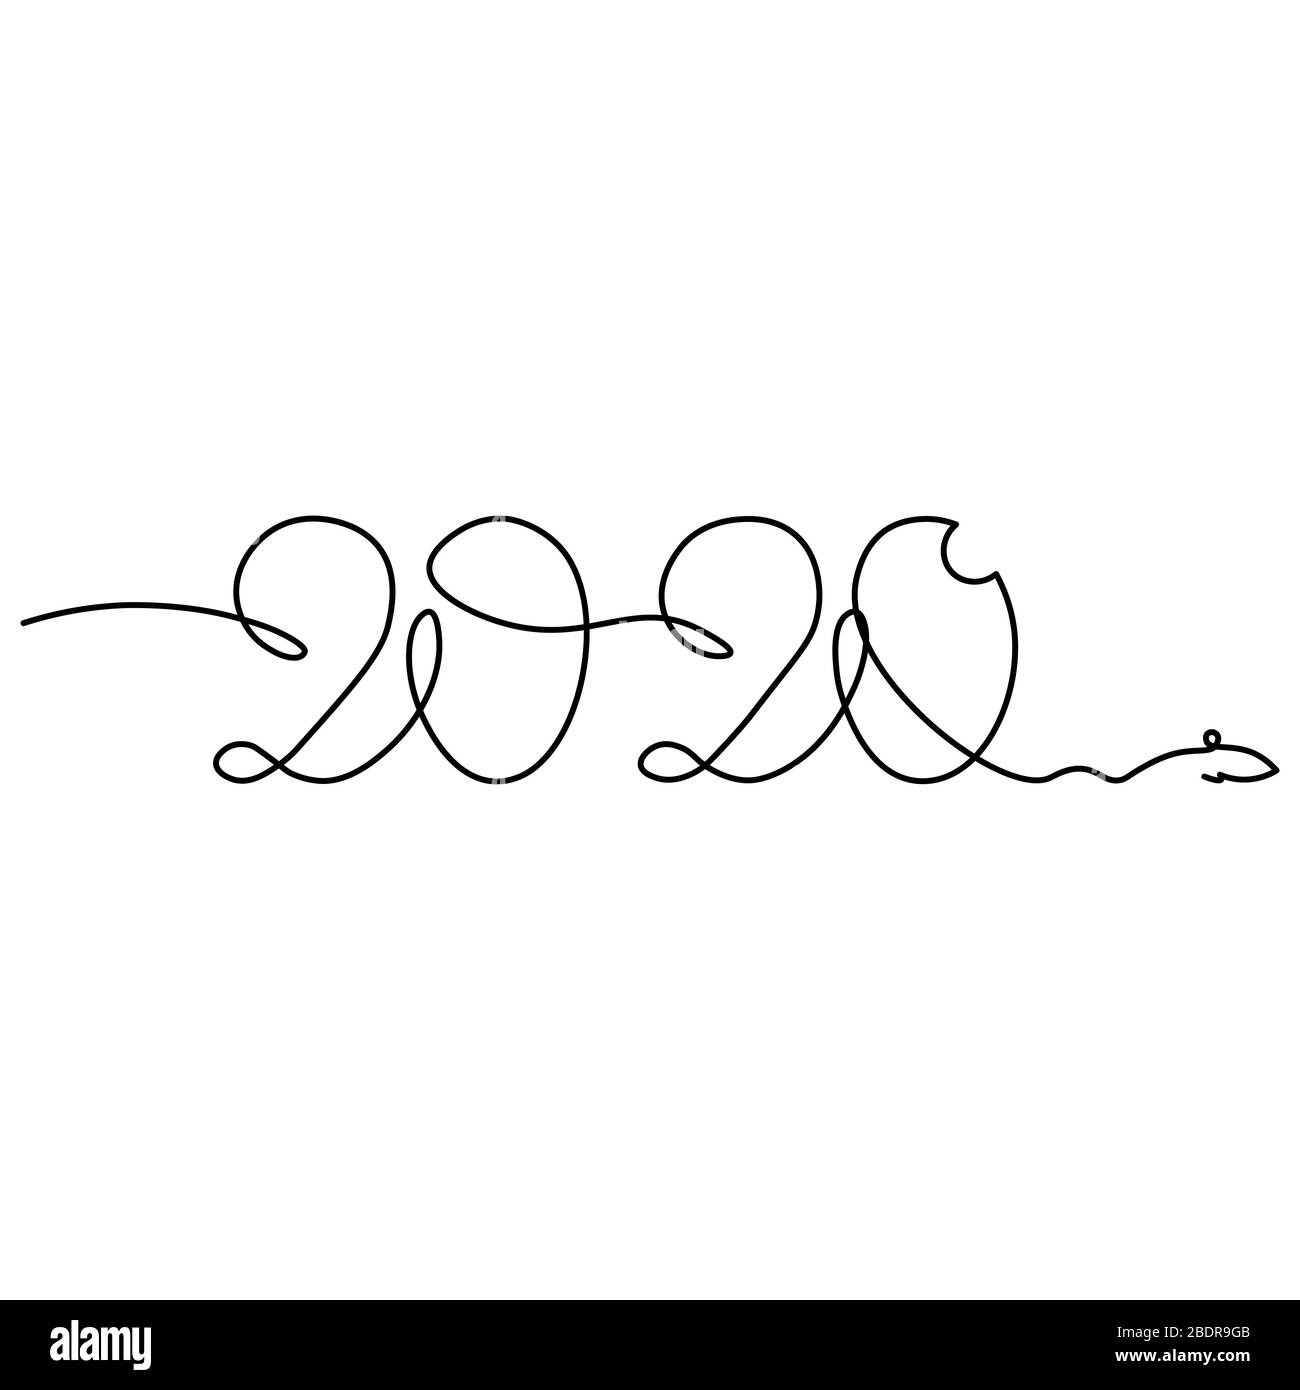 One continuous line drawing 2020. Vector new year illustration isolated on white background.. Stock Vector